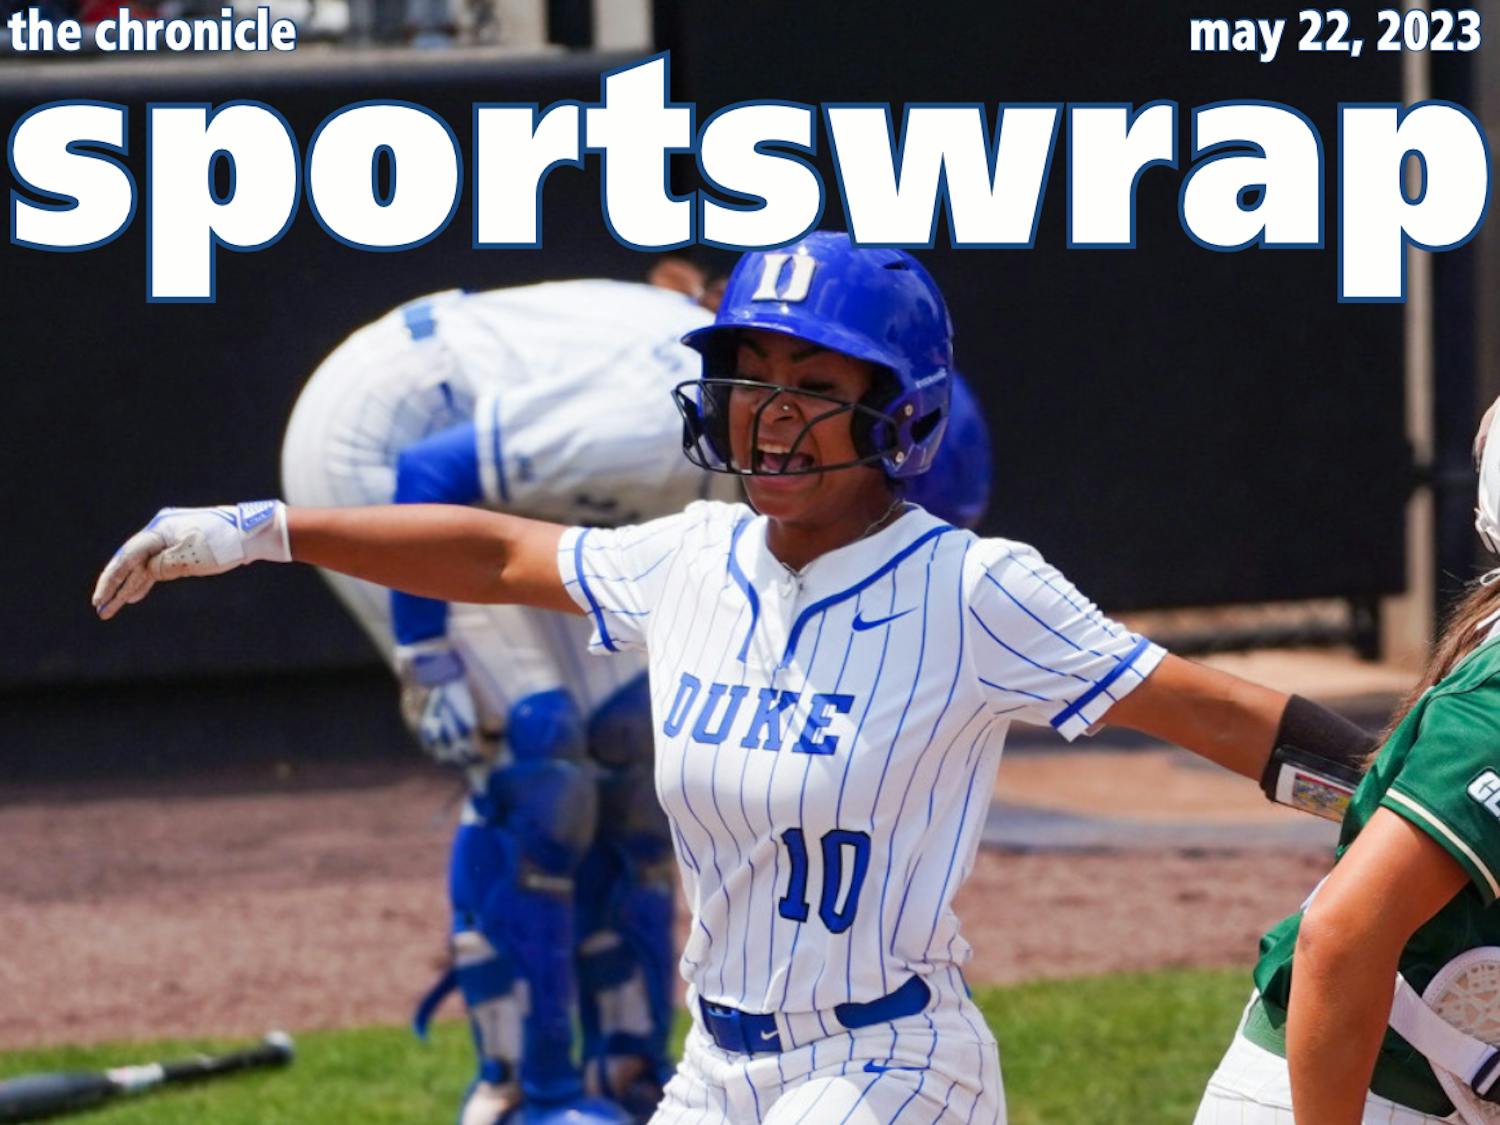 Duke's weekend triumph against Charlotte means that the Blue Devils will host a Super Regional for the first time in program history.